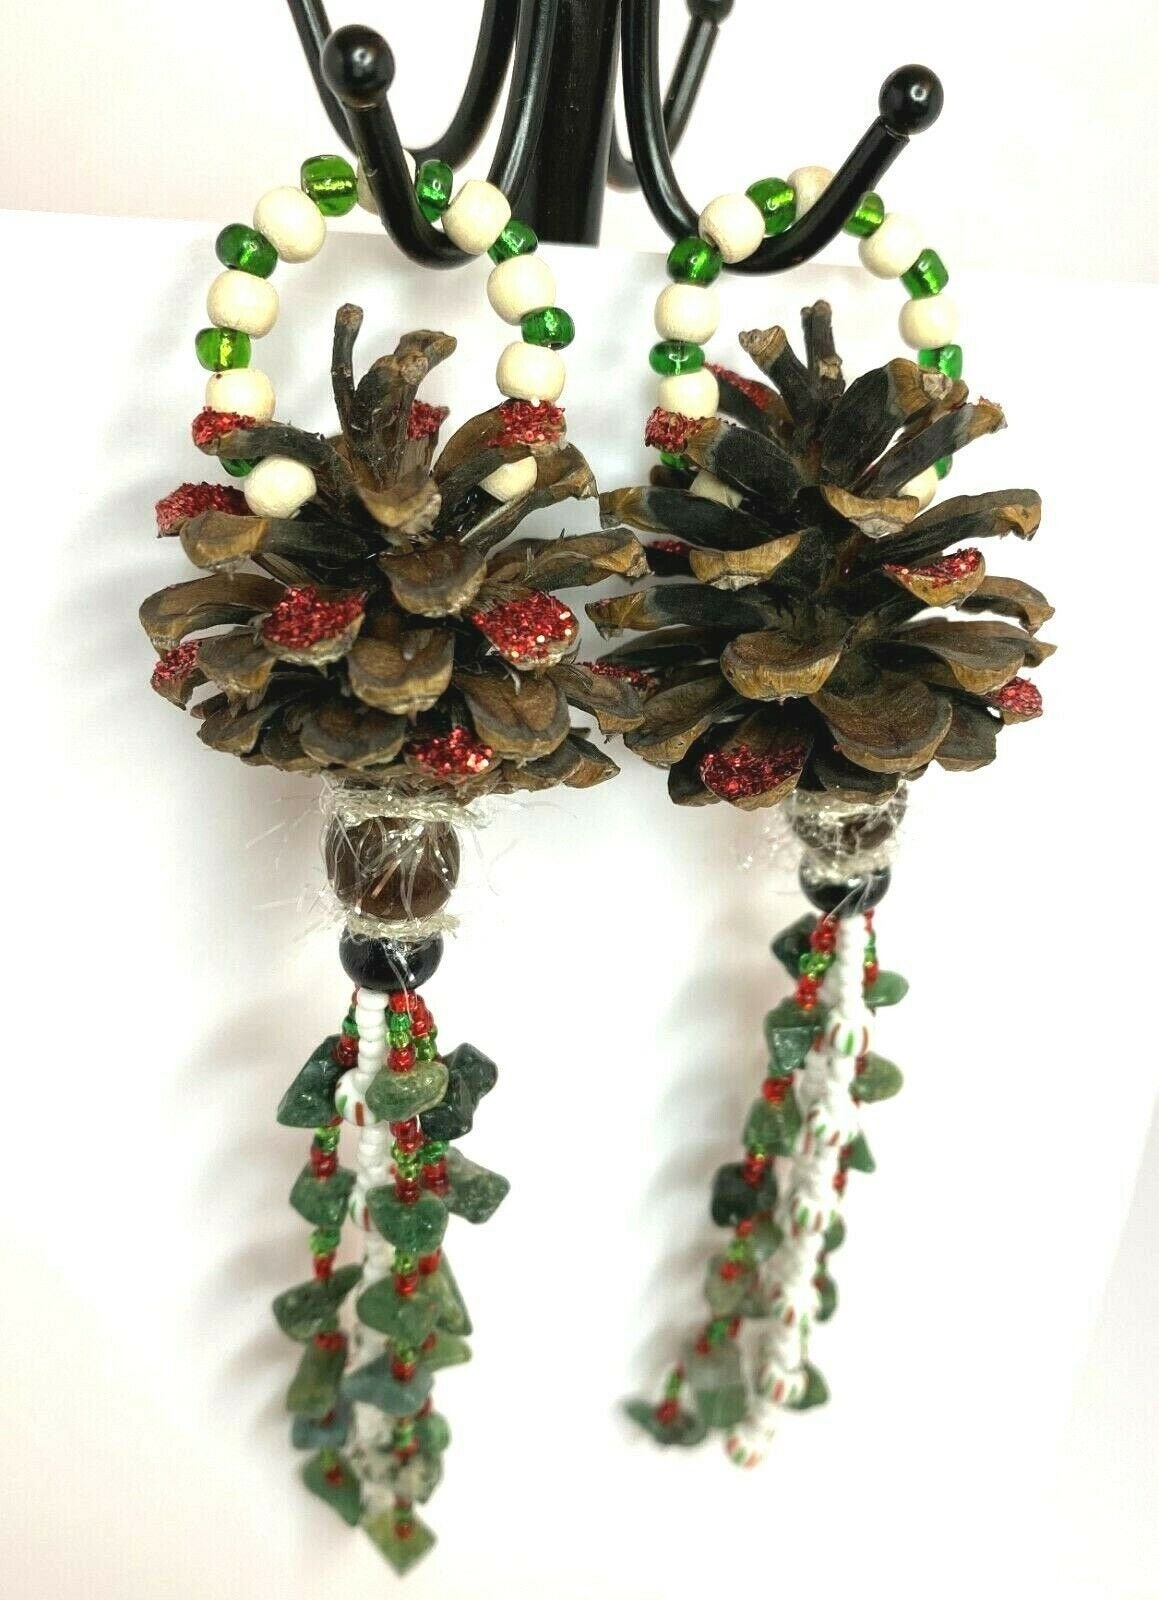 Handmade Christmas Pinecone Ornaments With Beads, Tassels, Moss Agate. Unique.